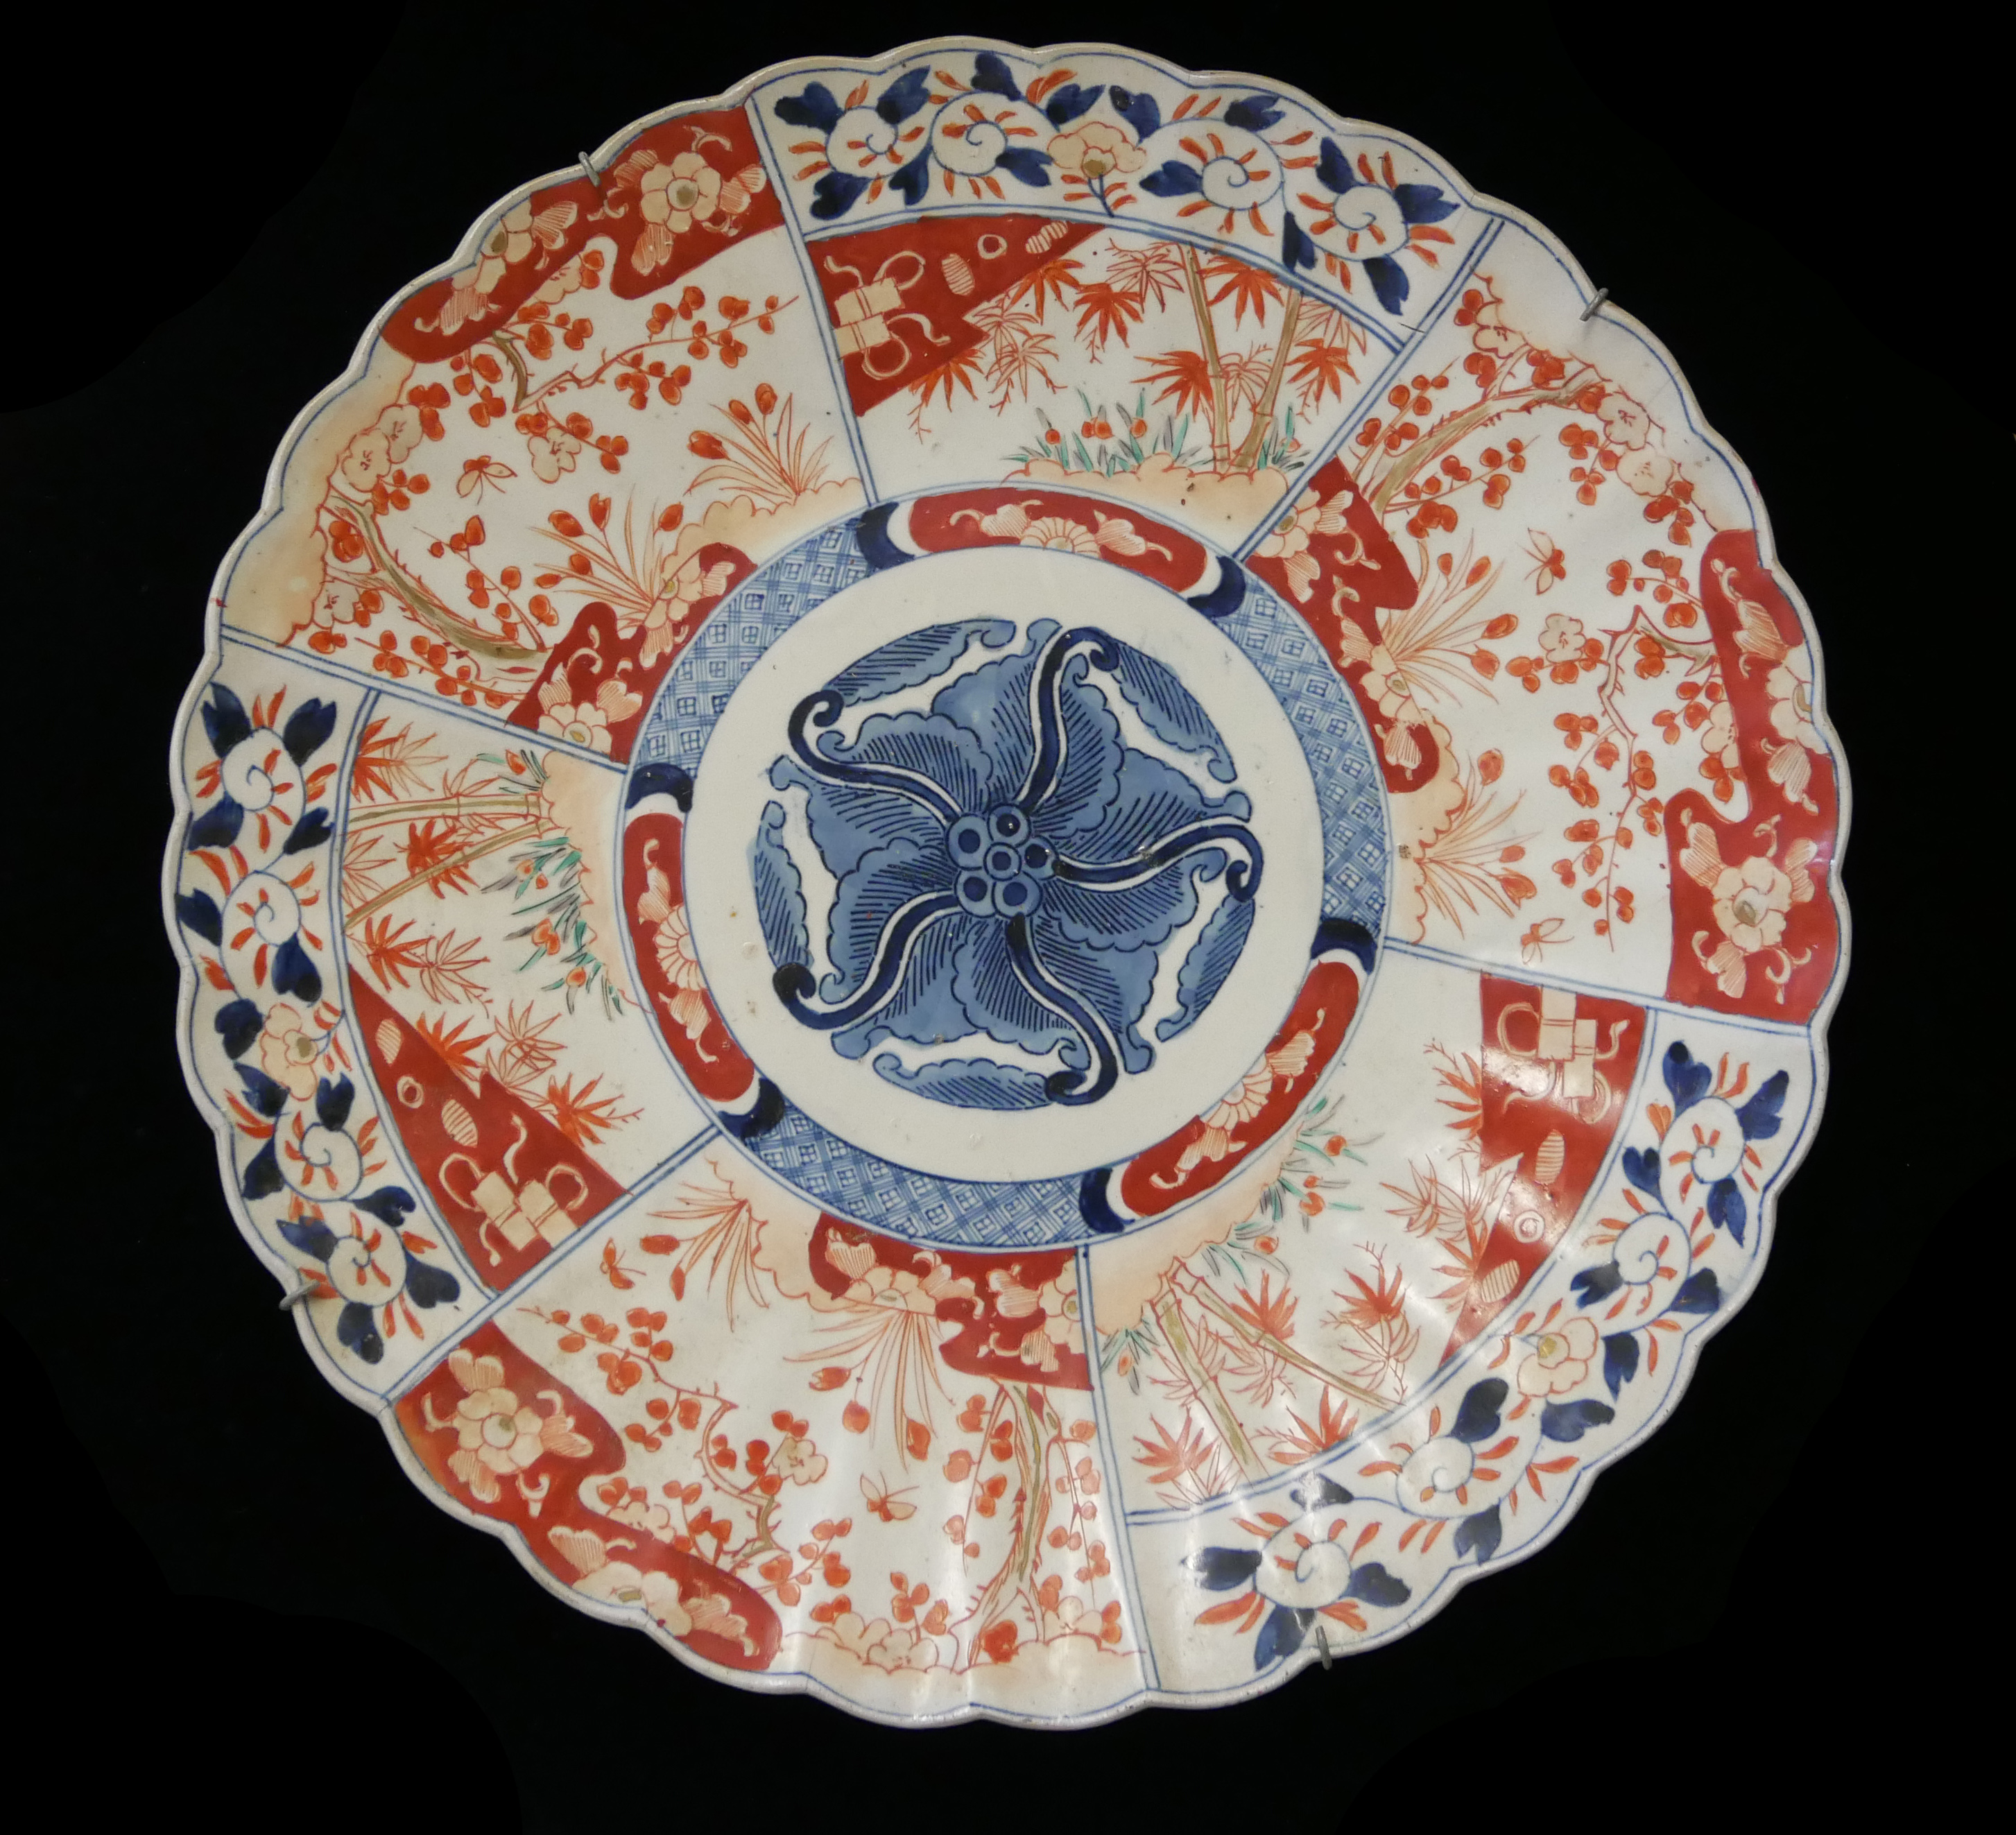 A 19TH CENTURY JAPANESE IMARI PORCELAIN CHARGER PLATE Chrysanthemum form with underglaze blue and